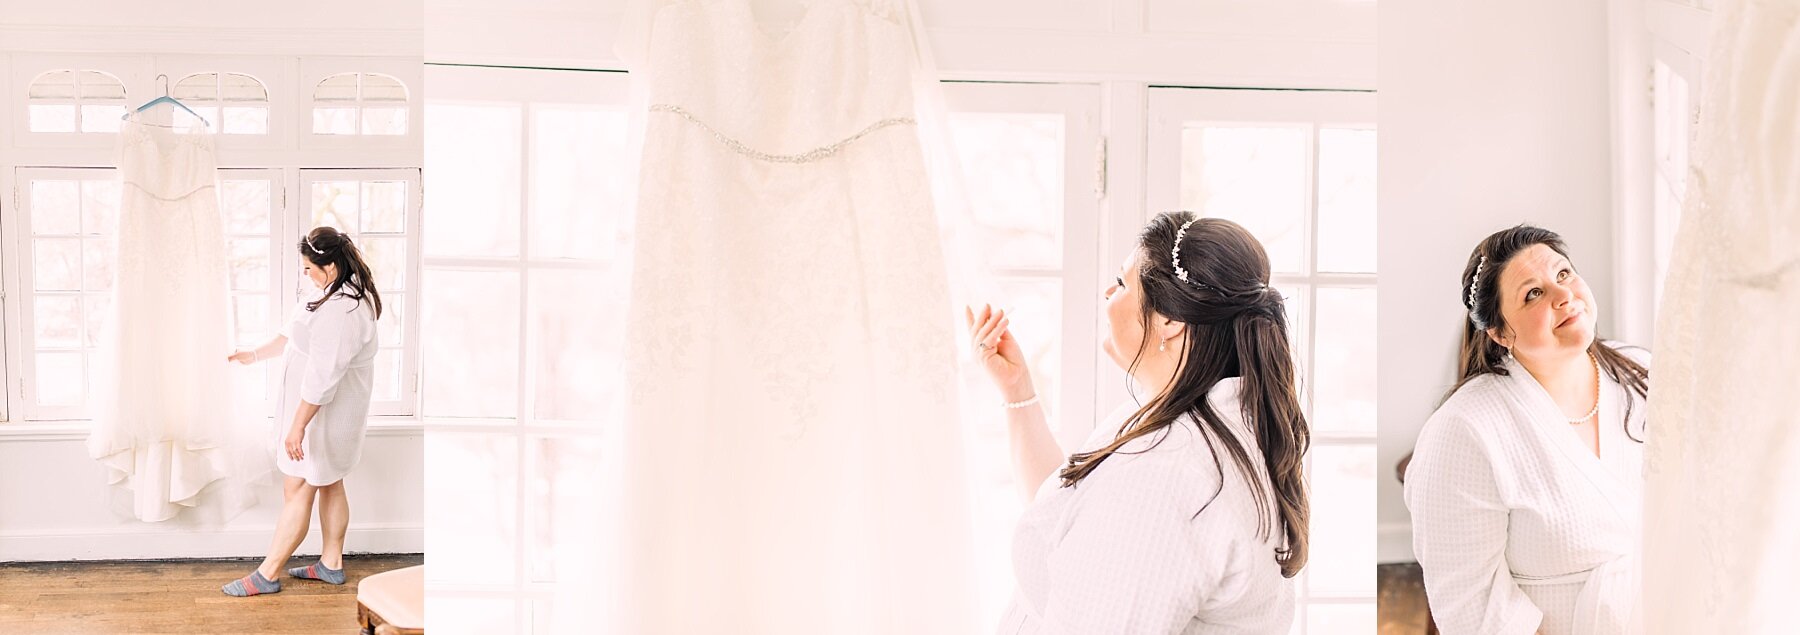 bride looking at her wedding dress in a white room fowler house mansion